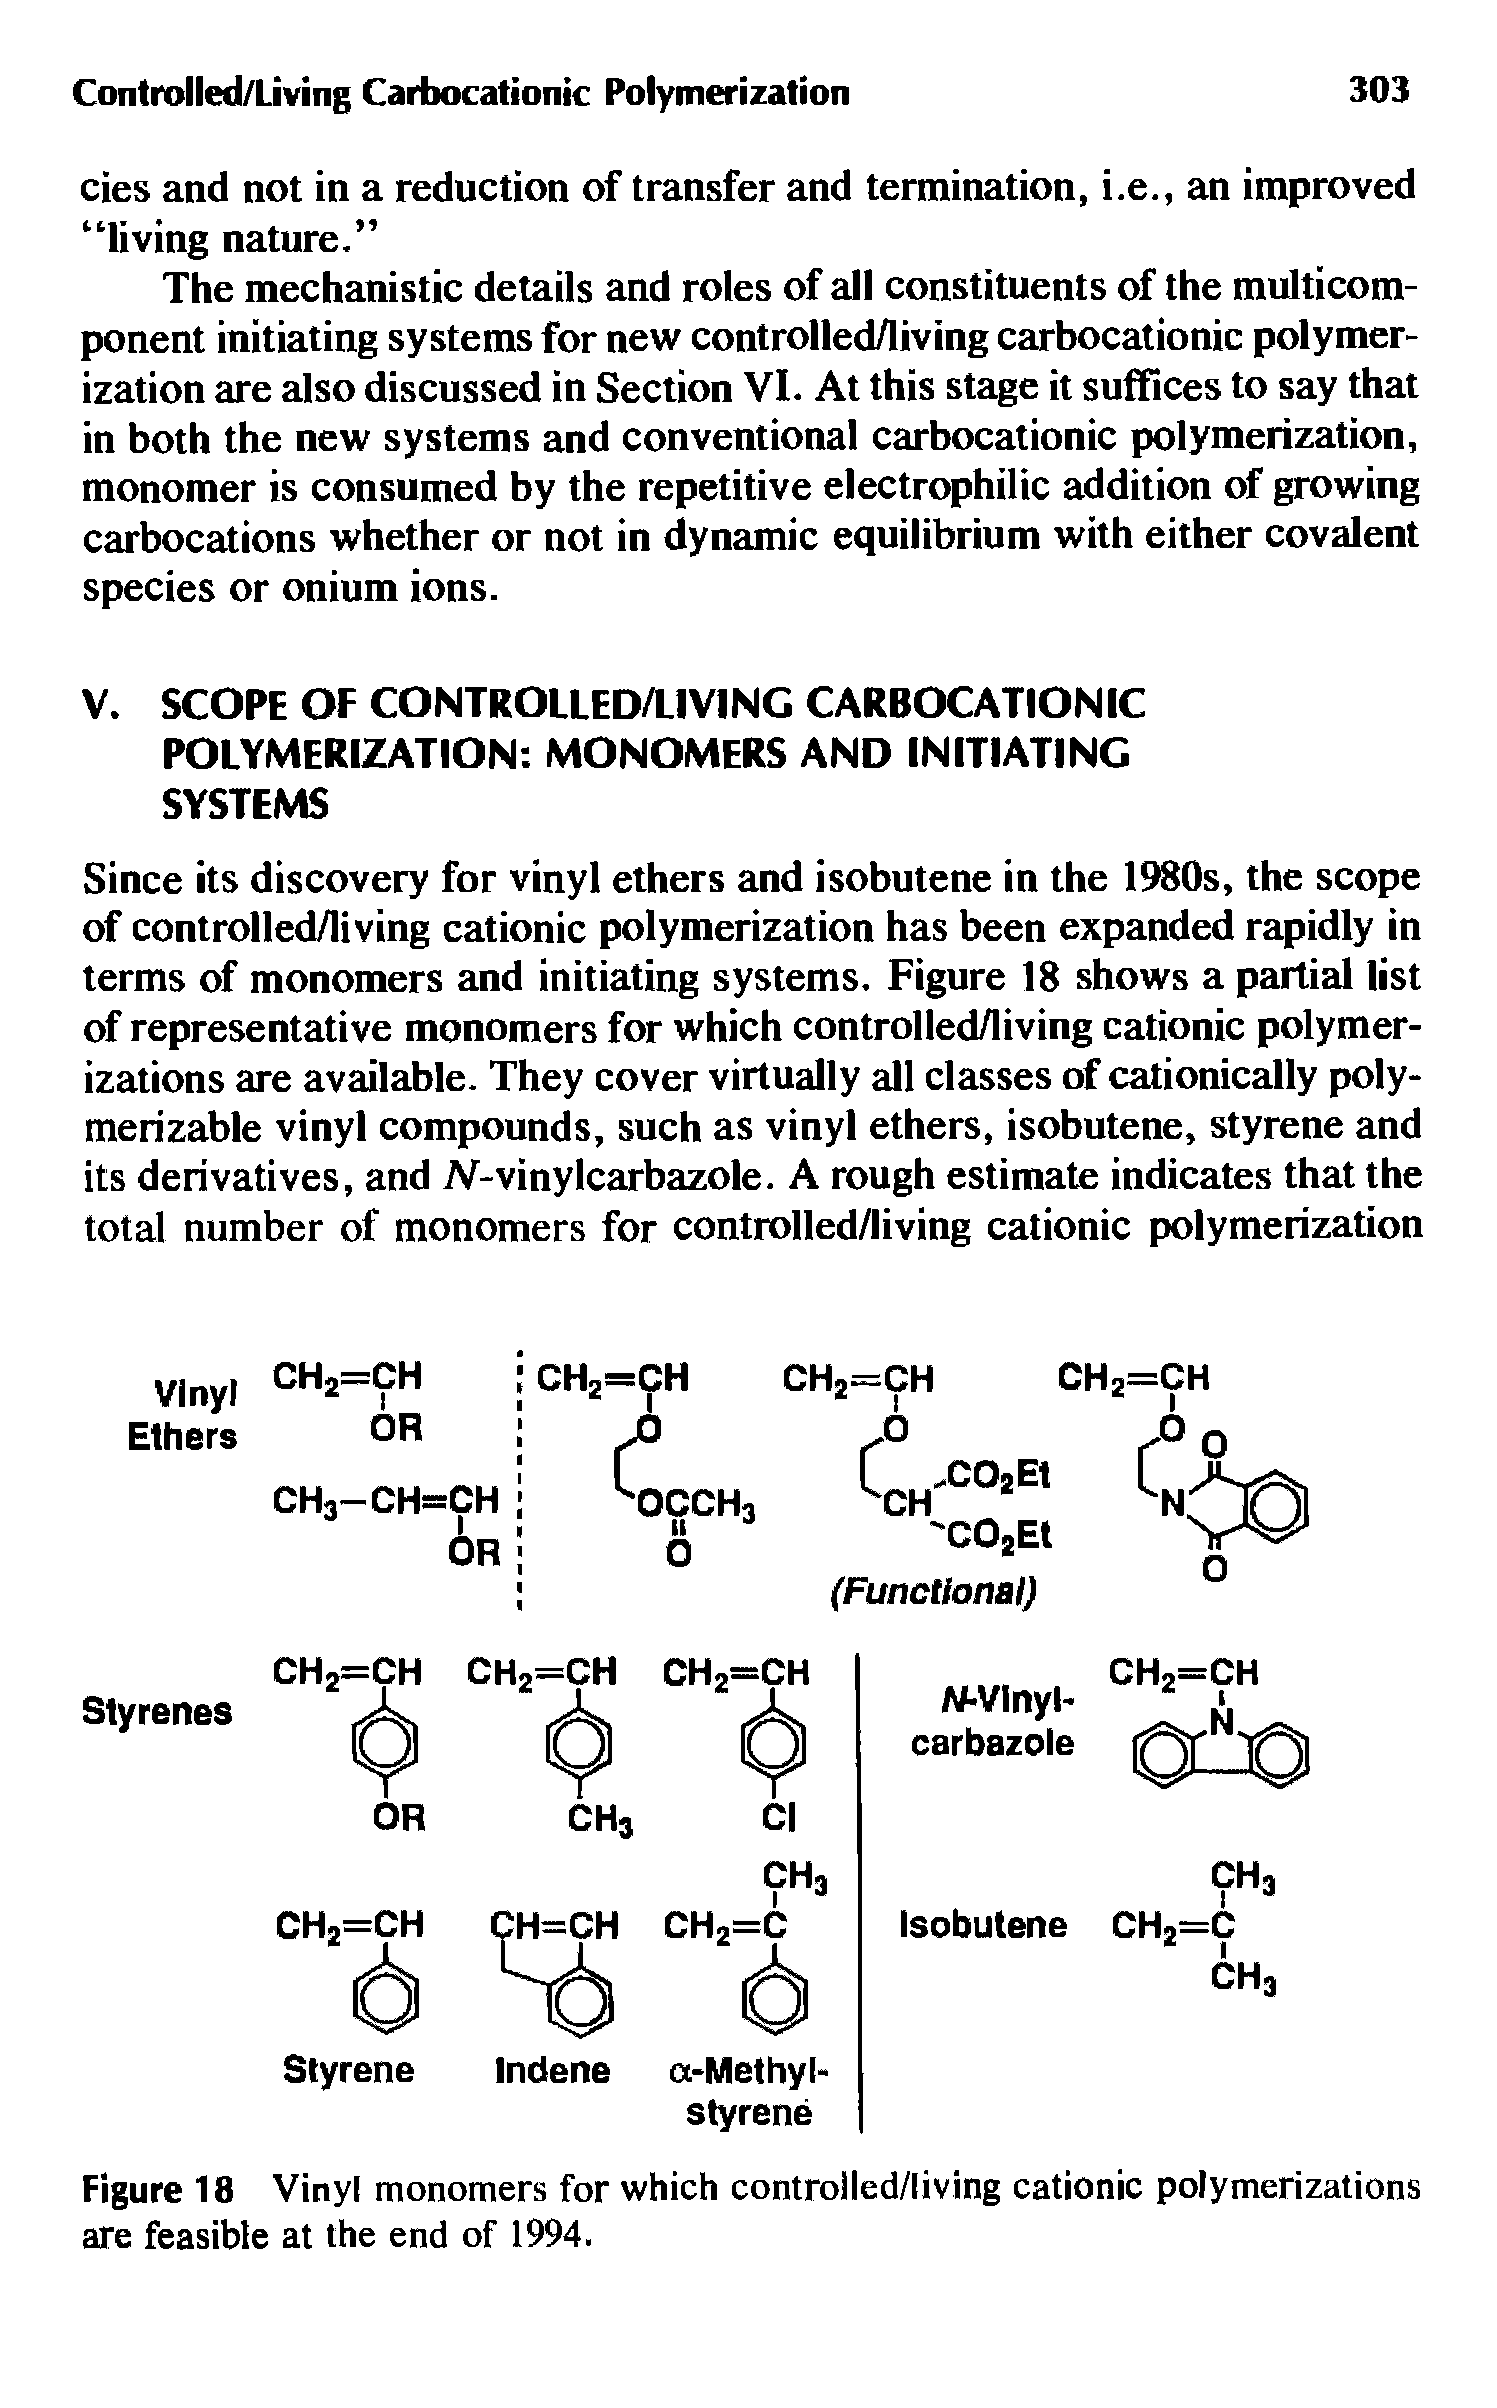 Figure 18 Vinyl monomers for which controlled/living cationic polymerizations are feasible at the end of 1994.